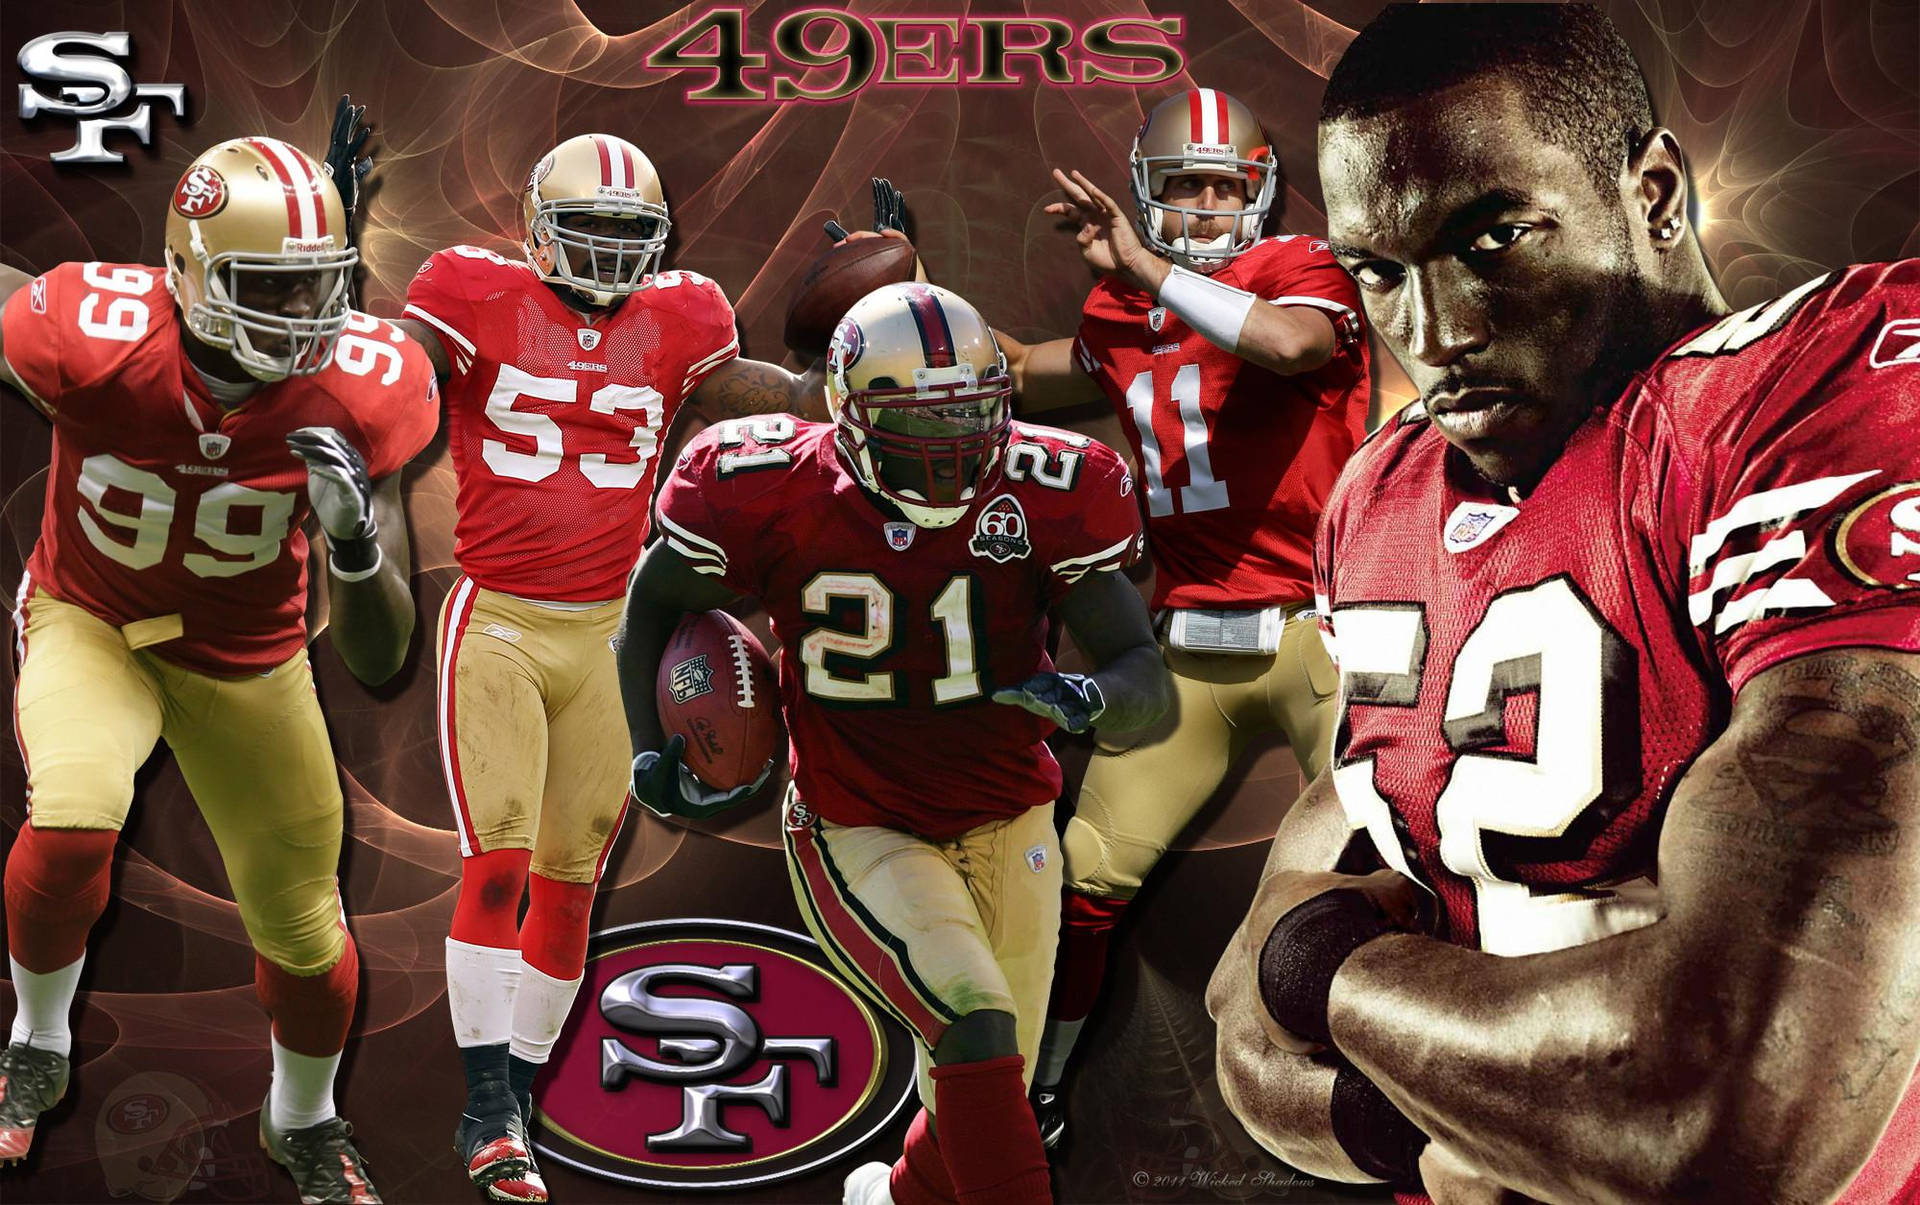 100 Free 49ers HD Wallpapers & Backgrounds 